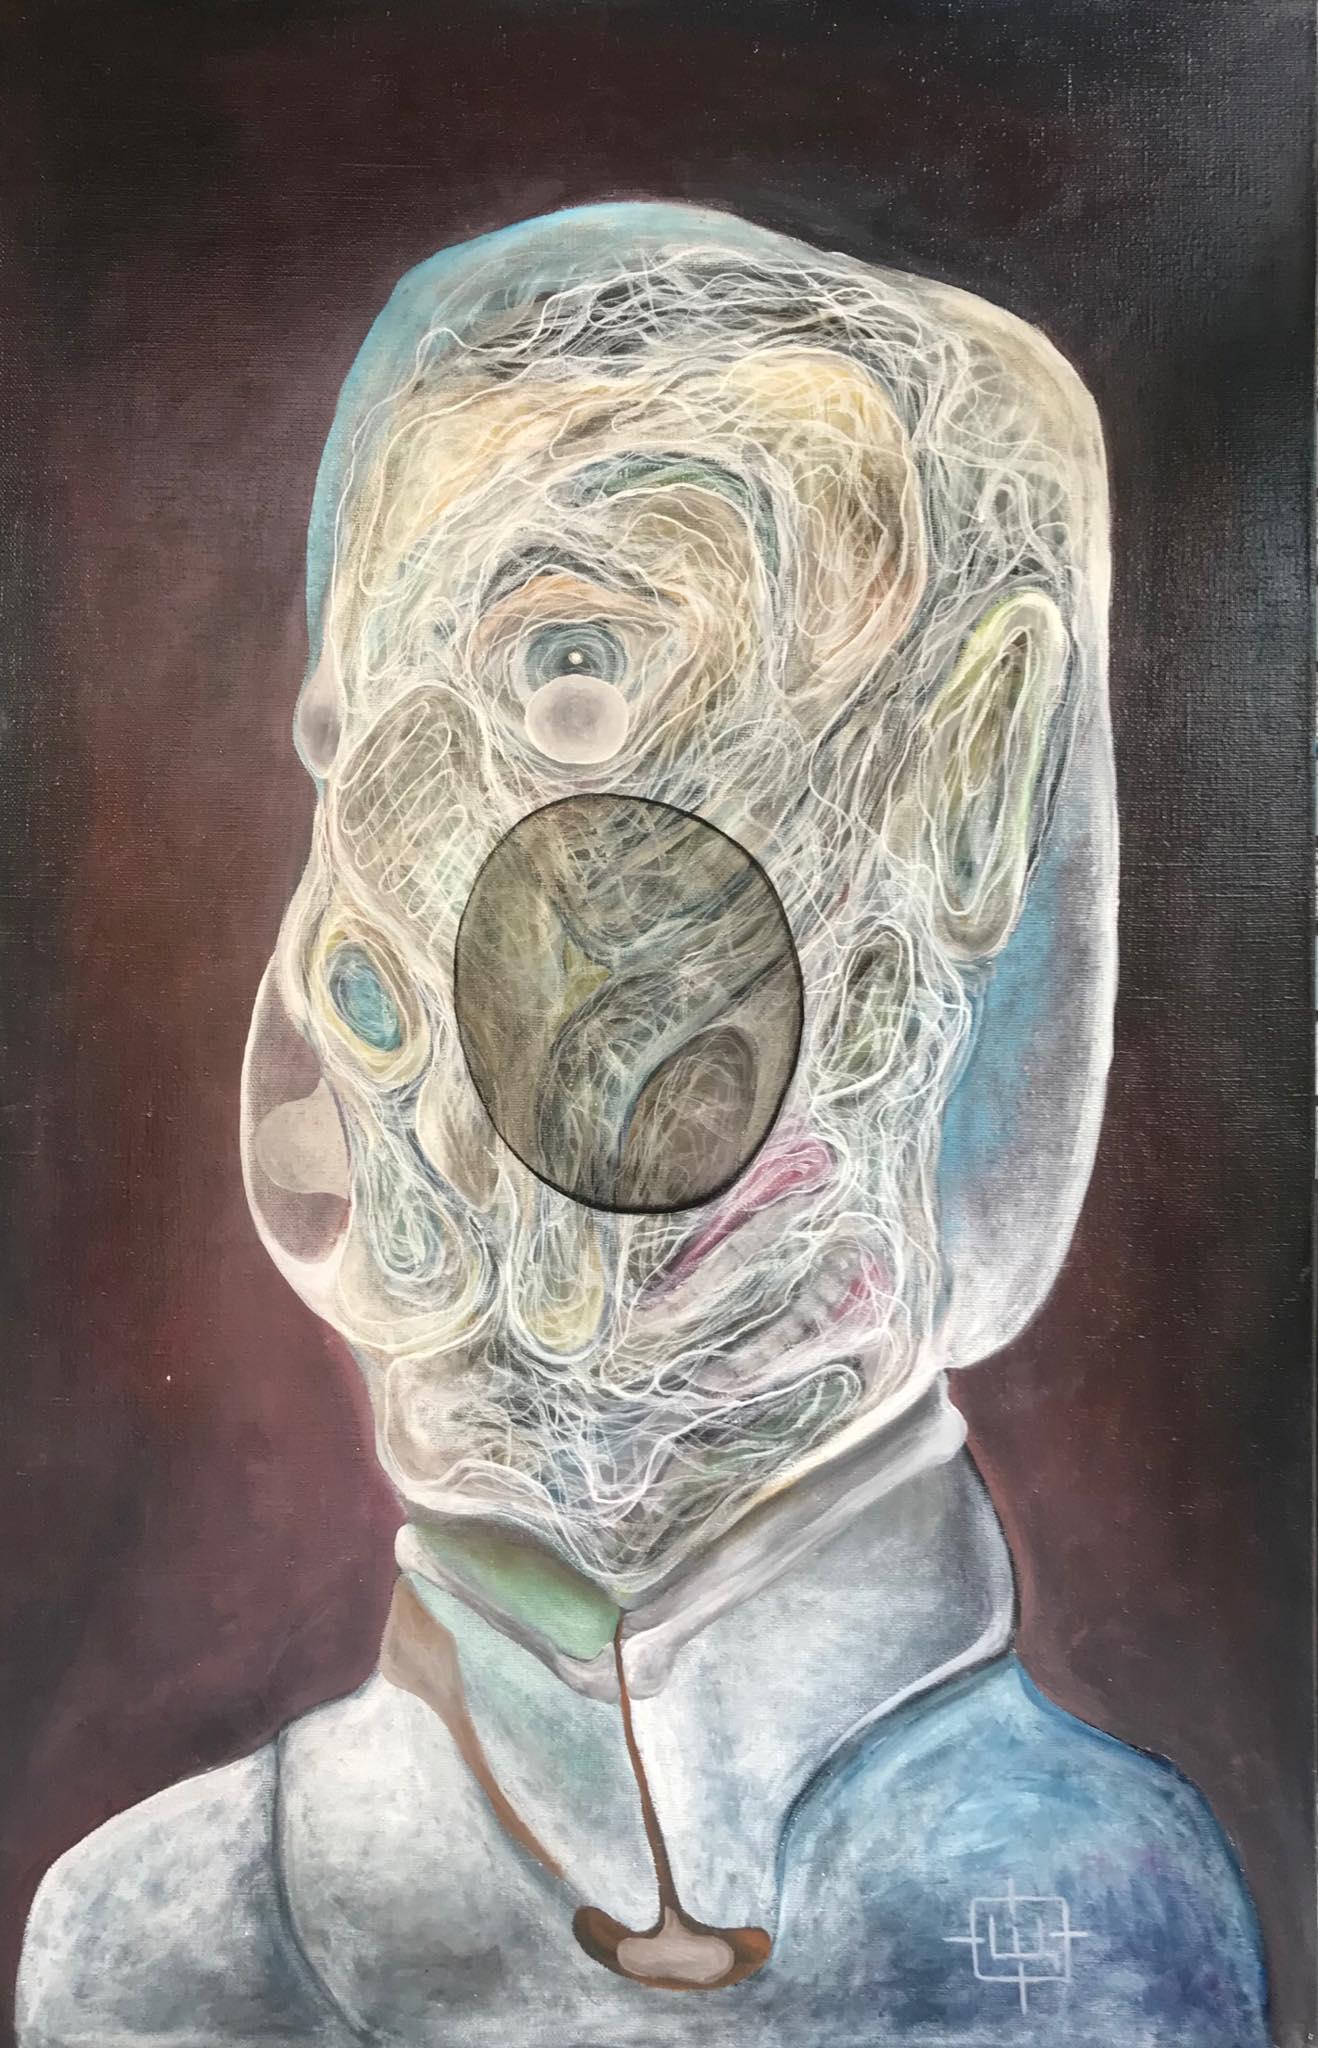 'Luminous 109' is an amazing surreal portrait of a human or a spiritual being. Personal growth and connection between people and nature are the major topics for the artist. This artwork will be highly valued by art appreciator and can be